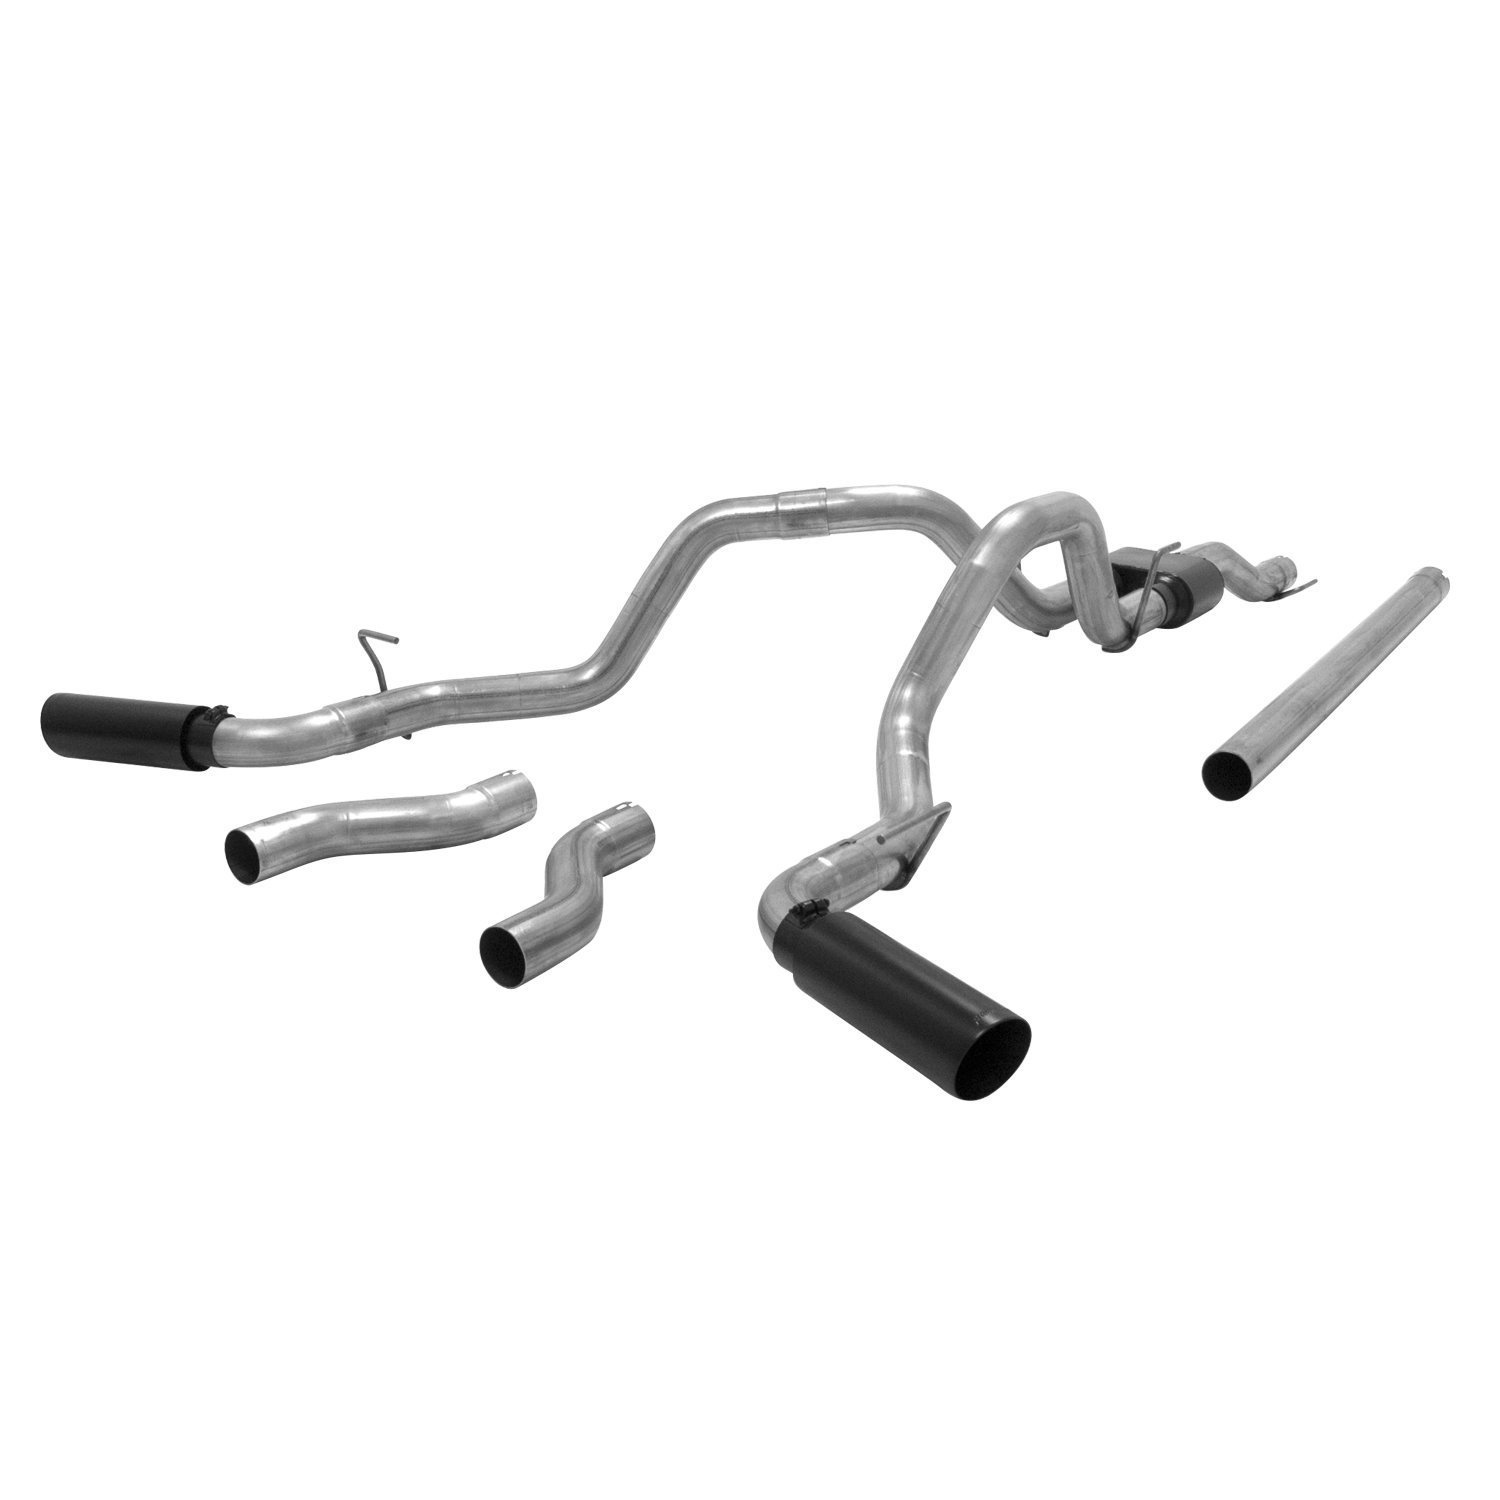 Outlaw Series Cat-Back Exhaust System 2006-2008 Dodge Ram 1500 5.7L V8